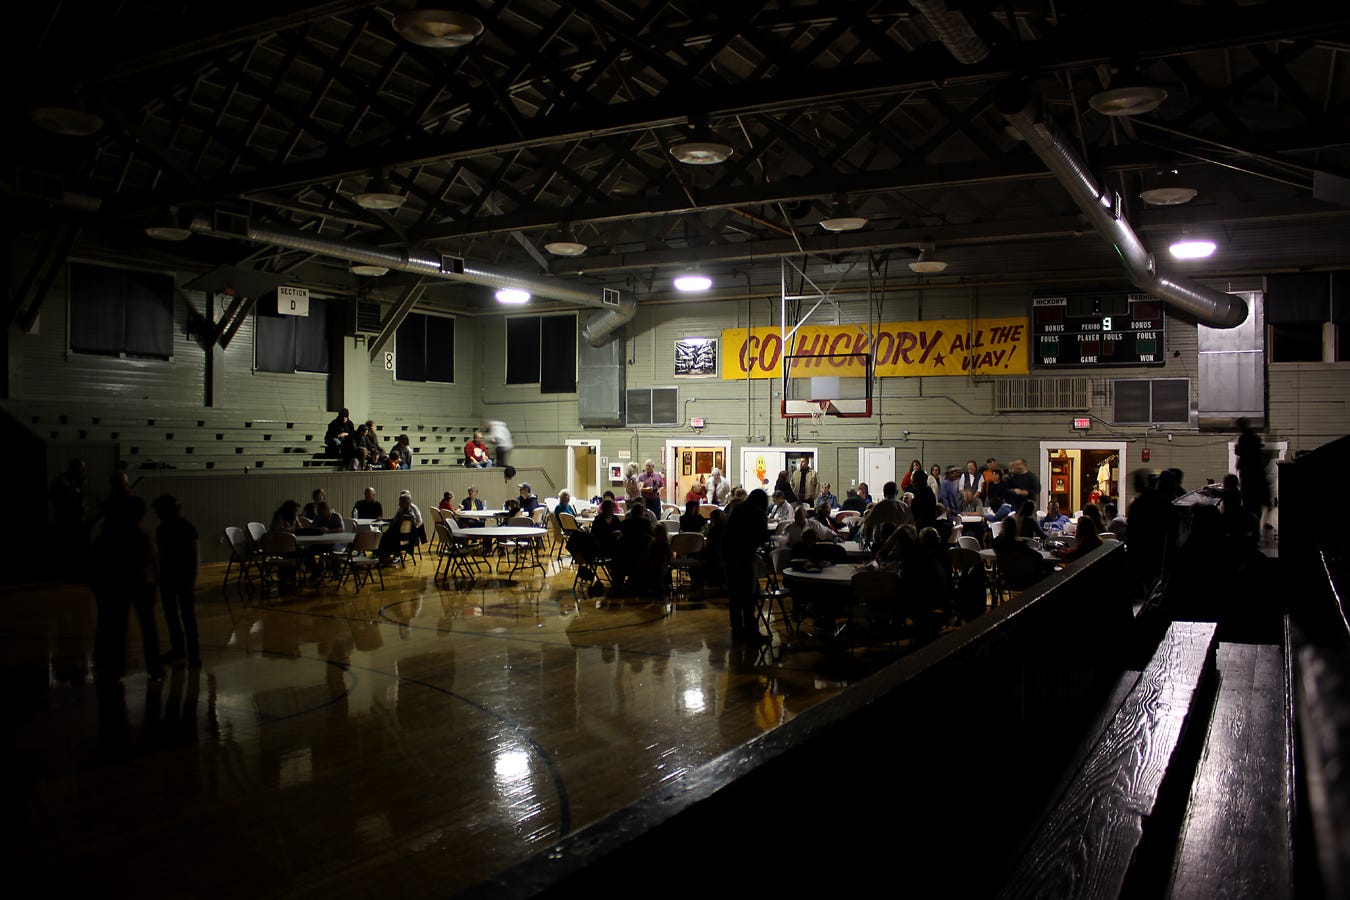 Basketball isn’t the only use for Knightstown’s historic Hoosier Gym Community Center. Weddings, birthday parties, class reunions, political forums, alumni banquets and sock hops (like the one in this photo) are regular events. Youth basketball leagues practice and play there regularly, as do adult pick-up ball leagues.